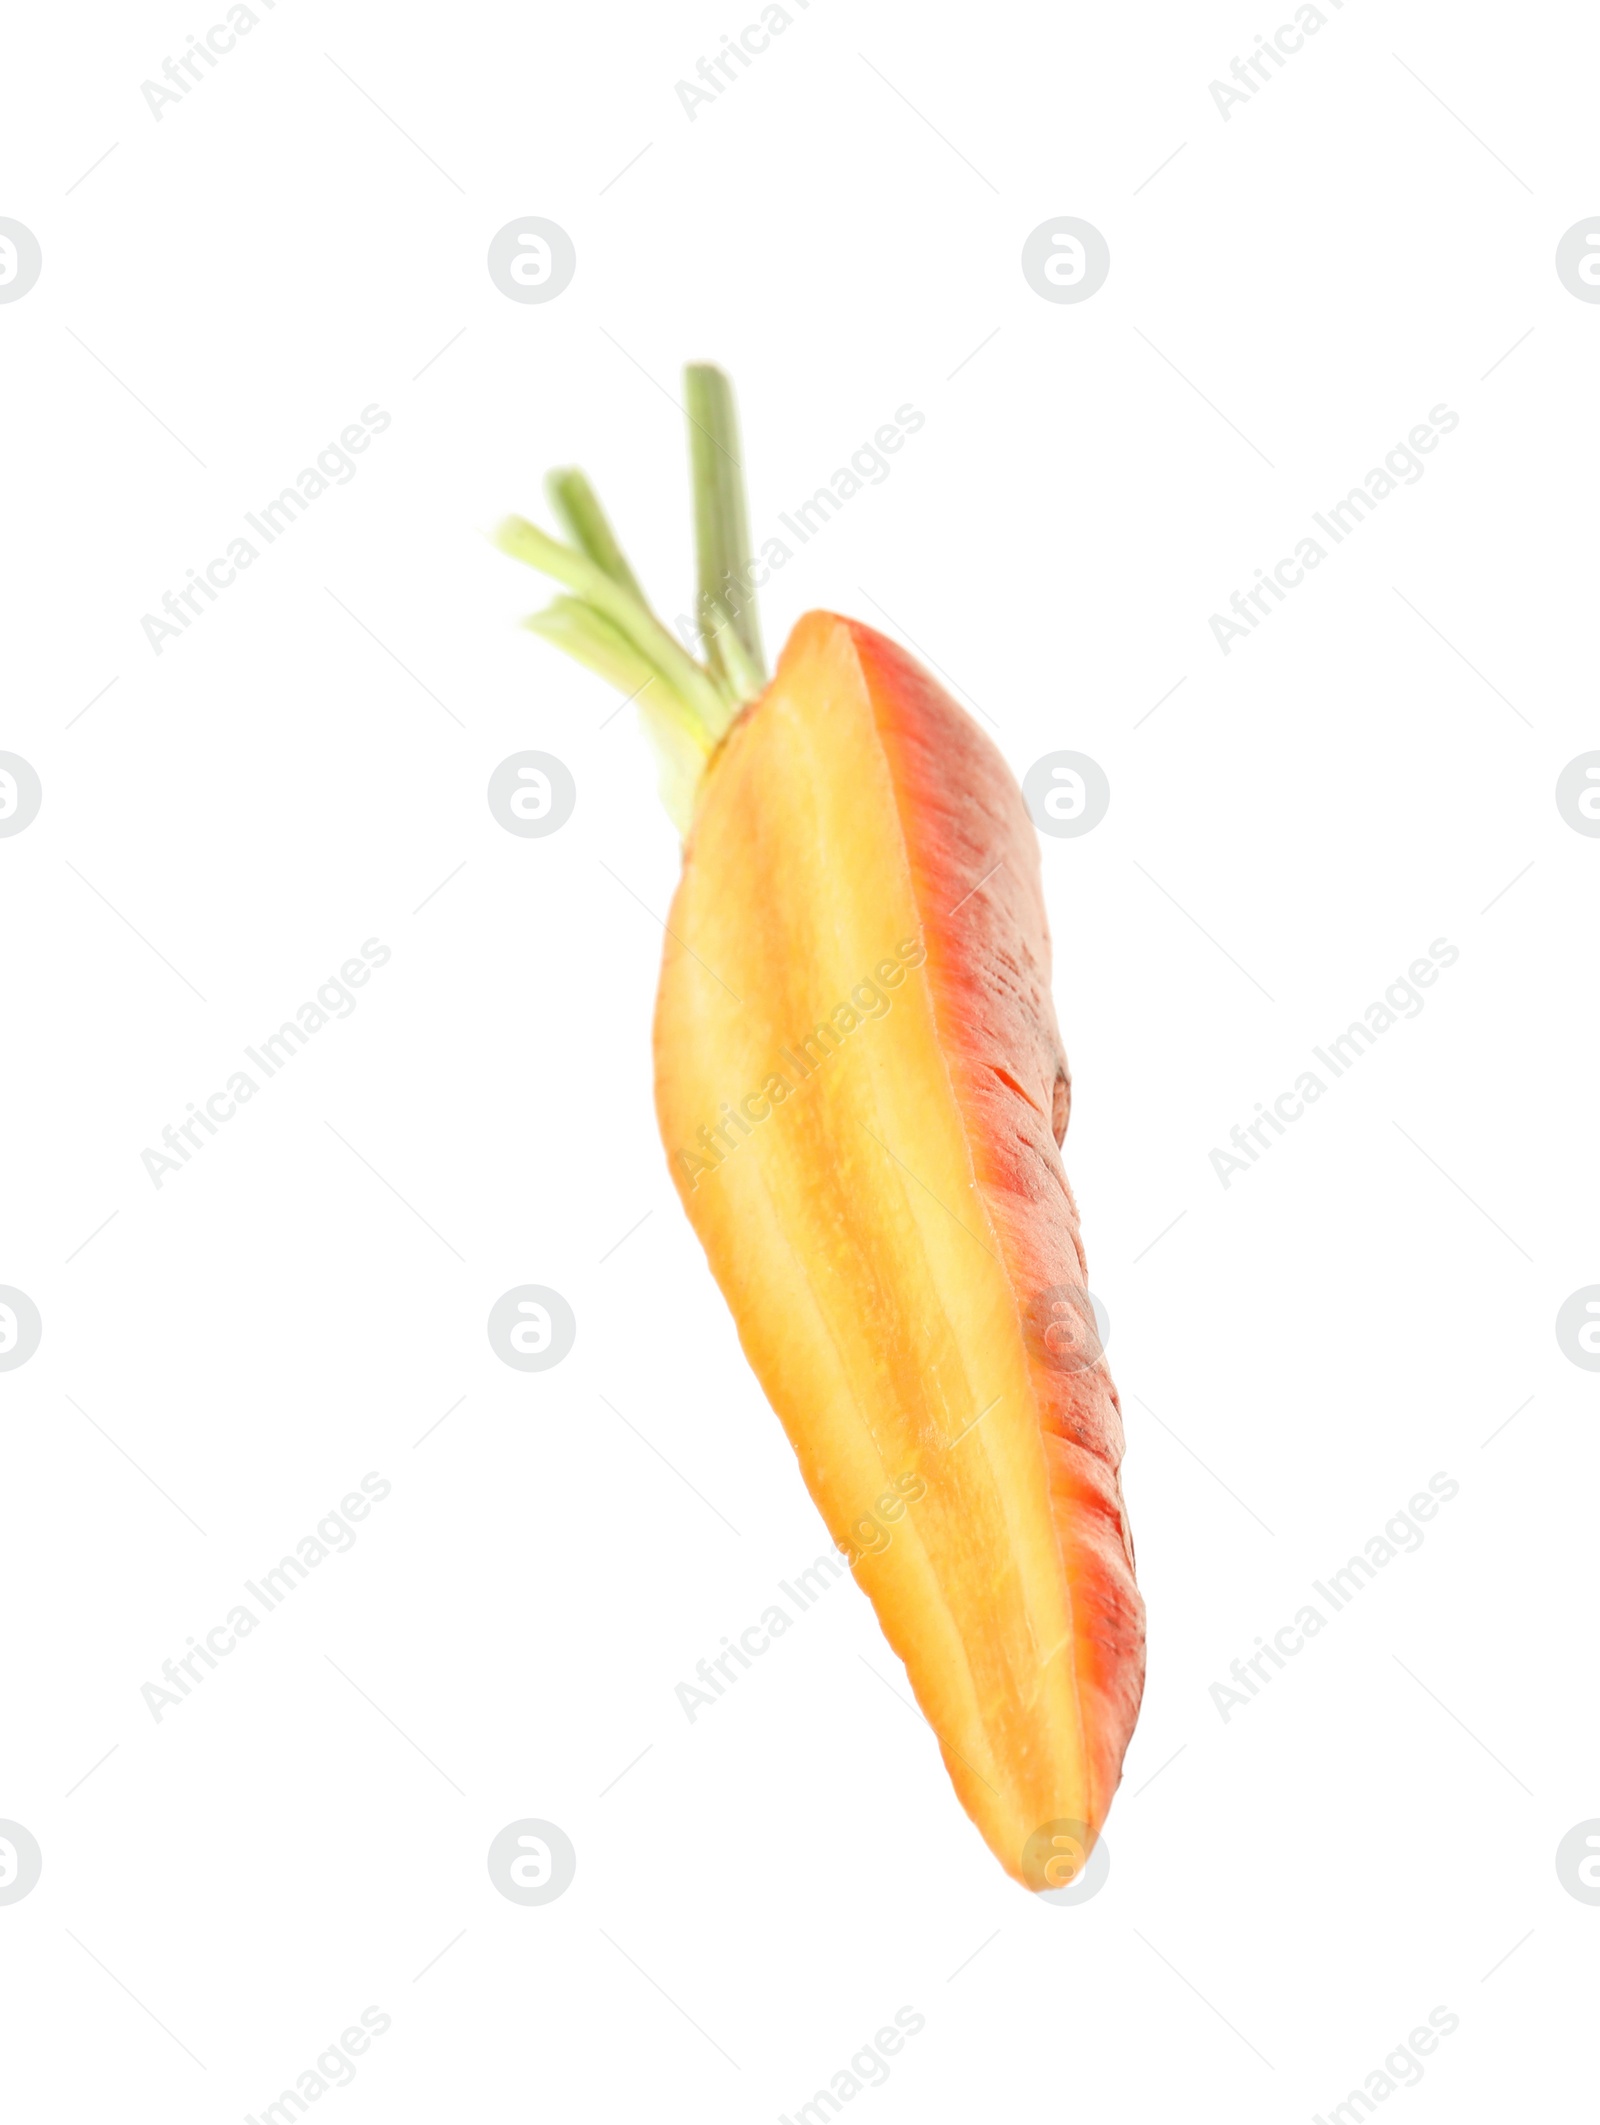 Photo of Half of fresh ripe carrot isolated on white